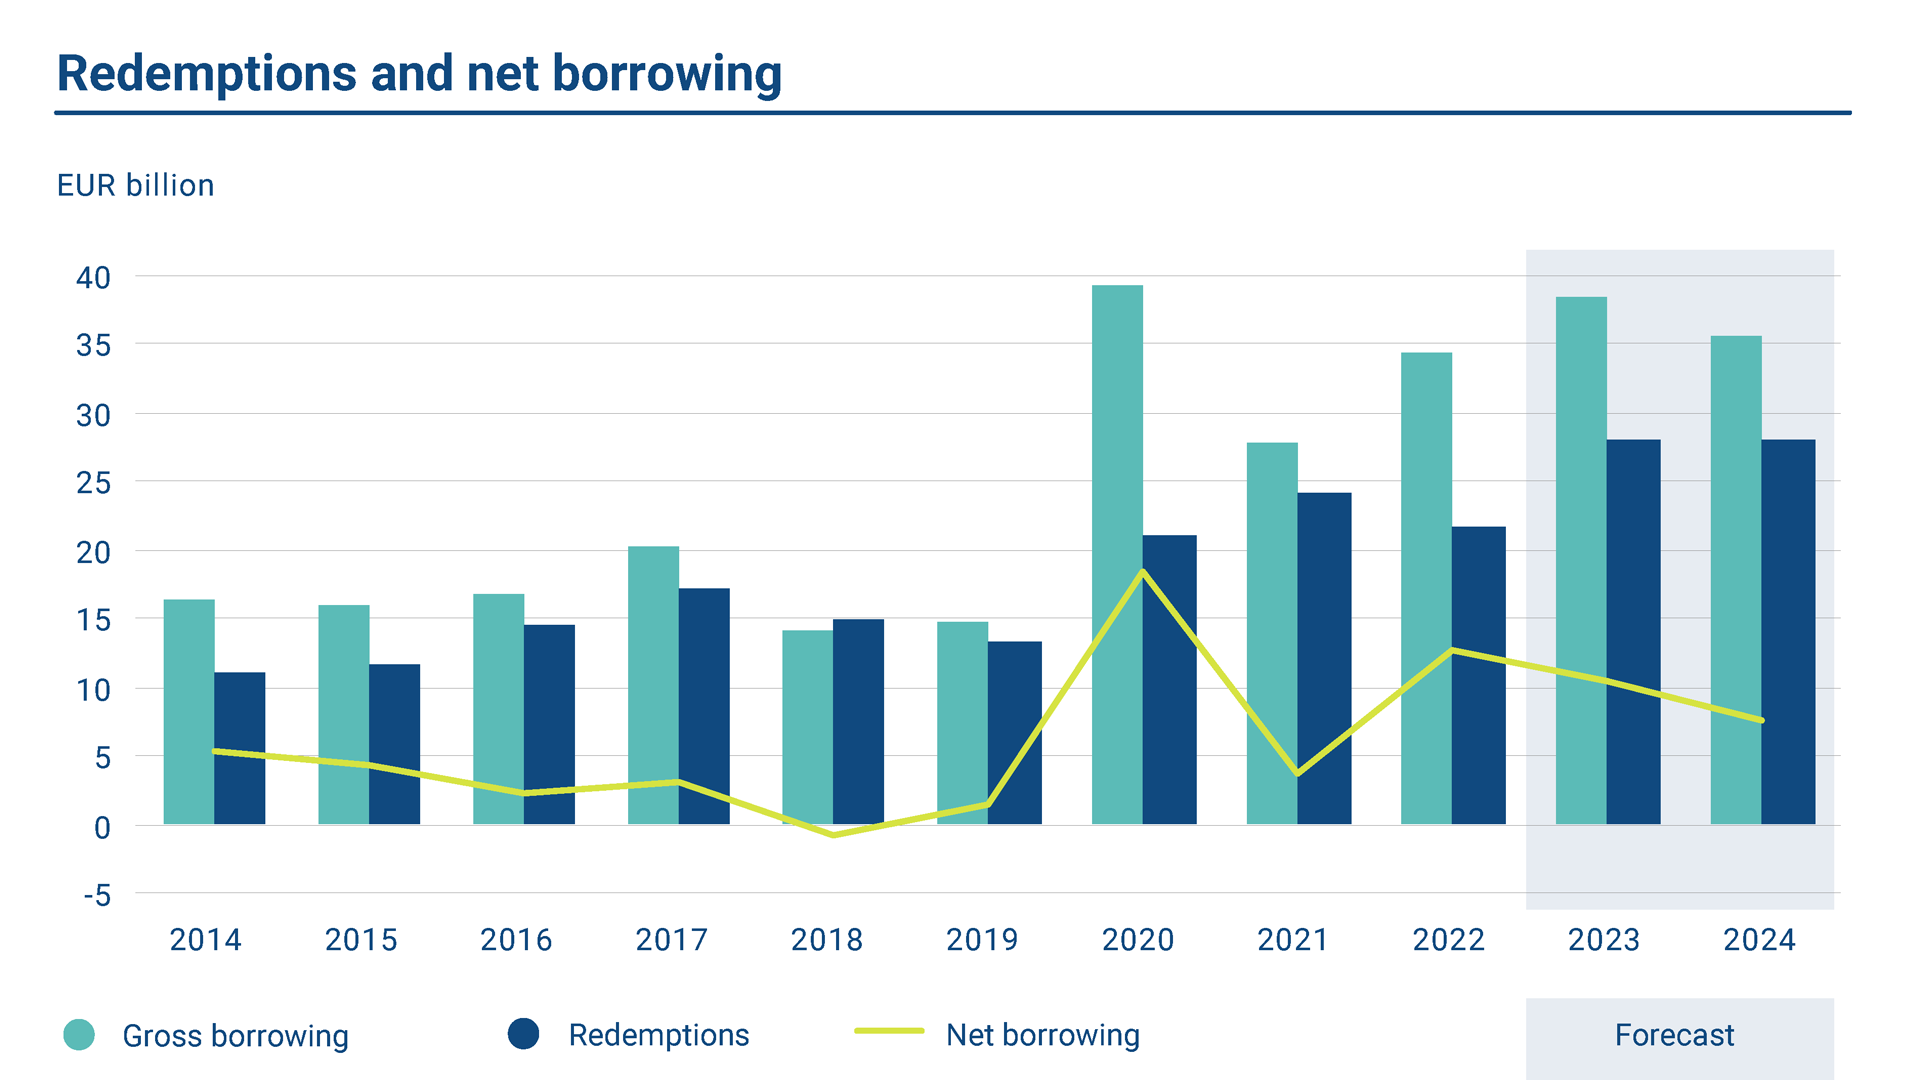 The graph shows annual gross borrowing, redemptions and net borrowing in 2014-2024. Redemptions of EUR 21.64 billion took place in 2022 while net borrowing amounted to EUR 12.68 billion.